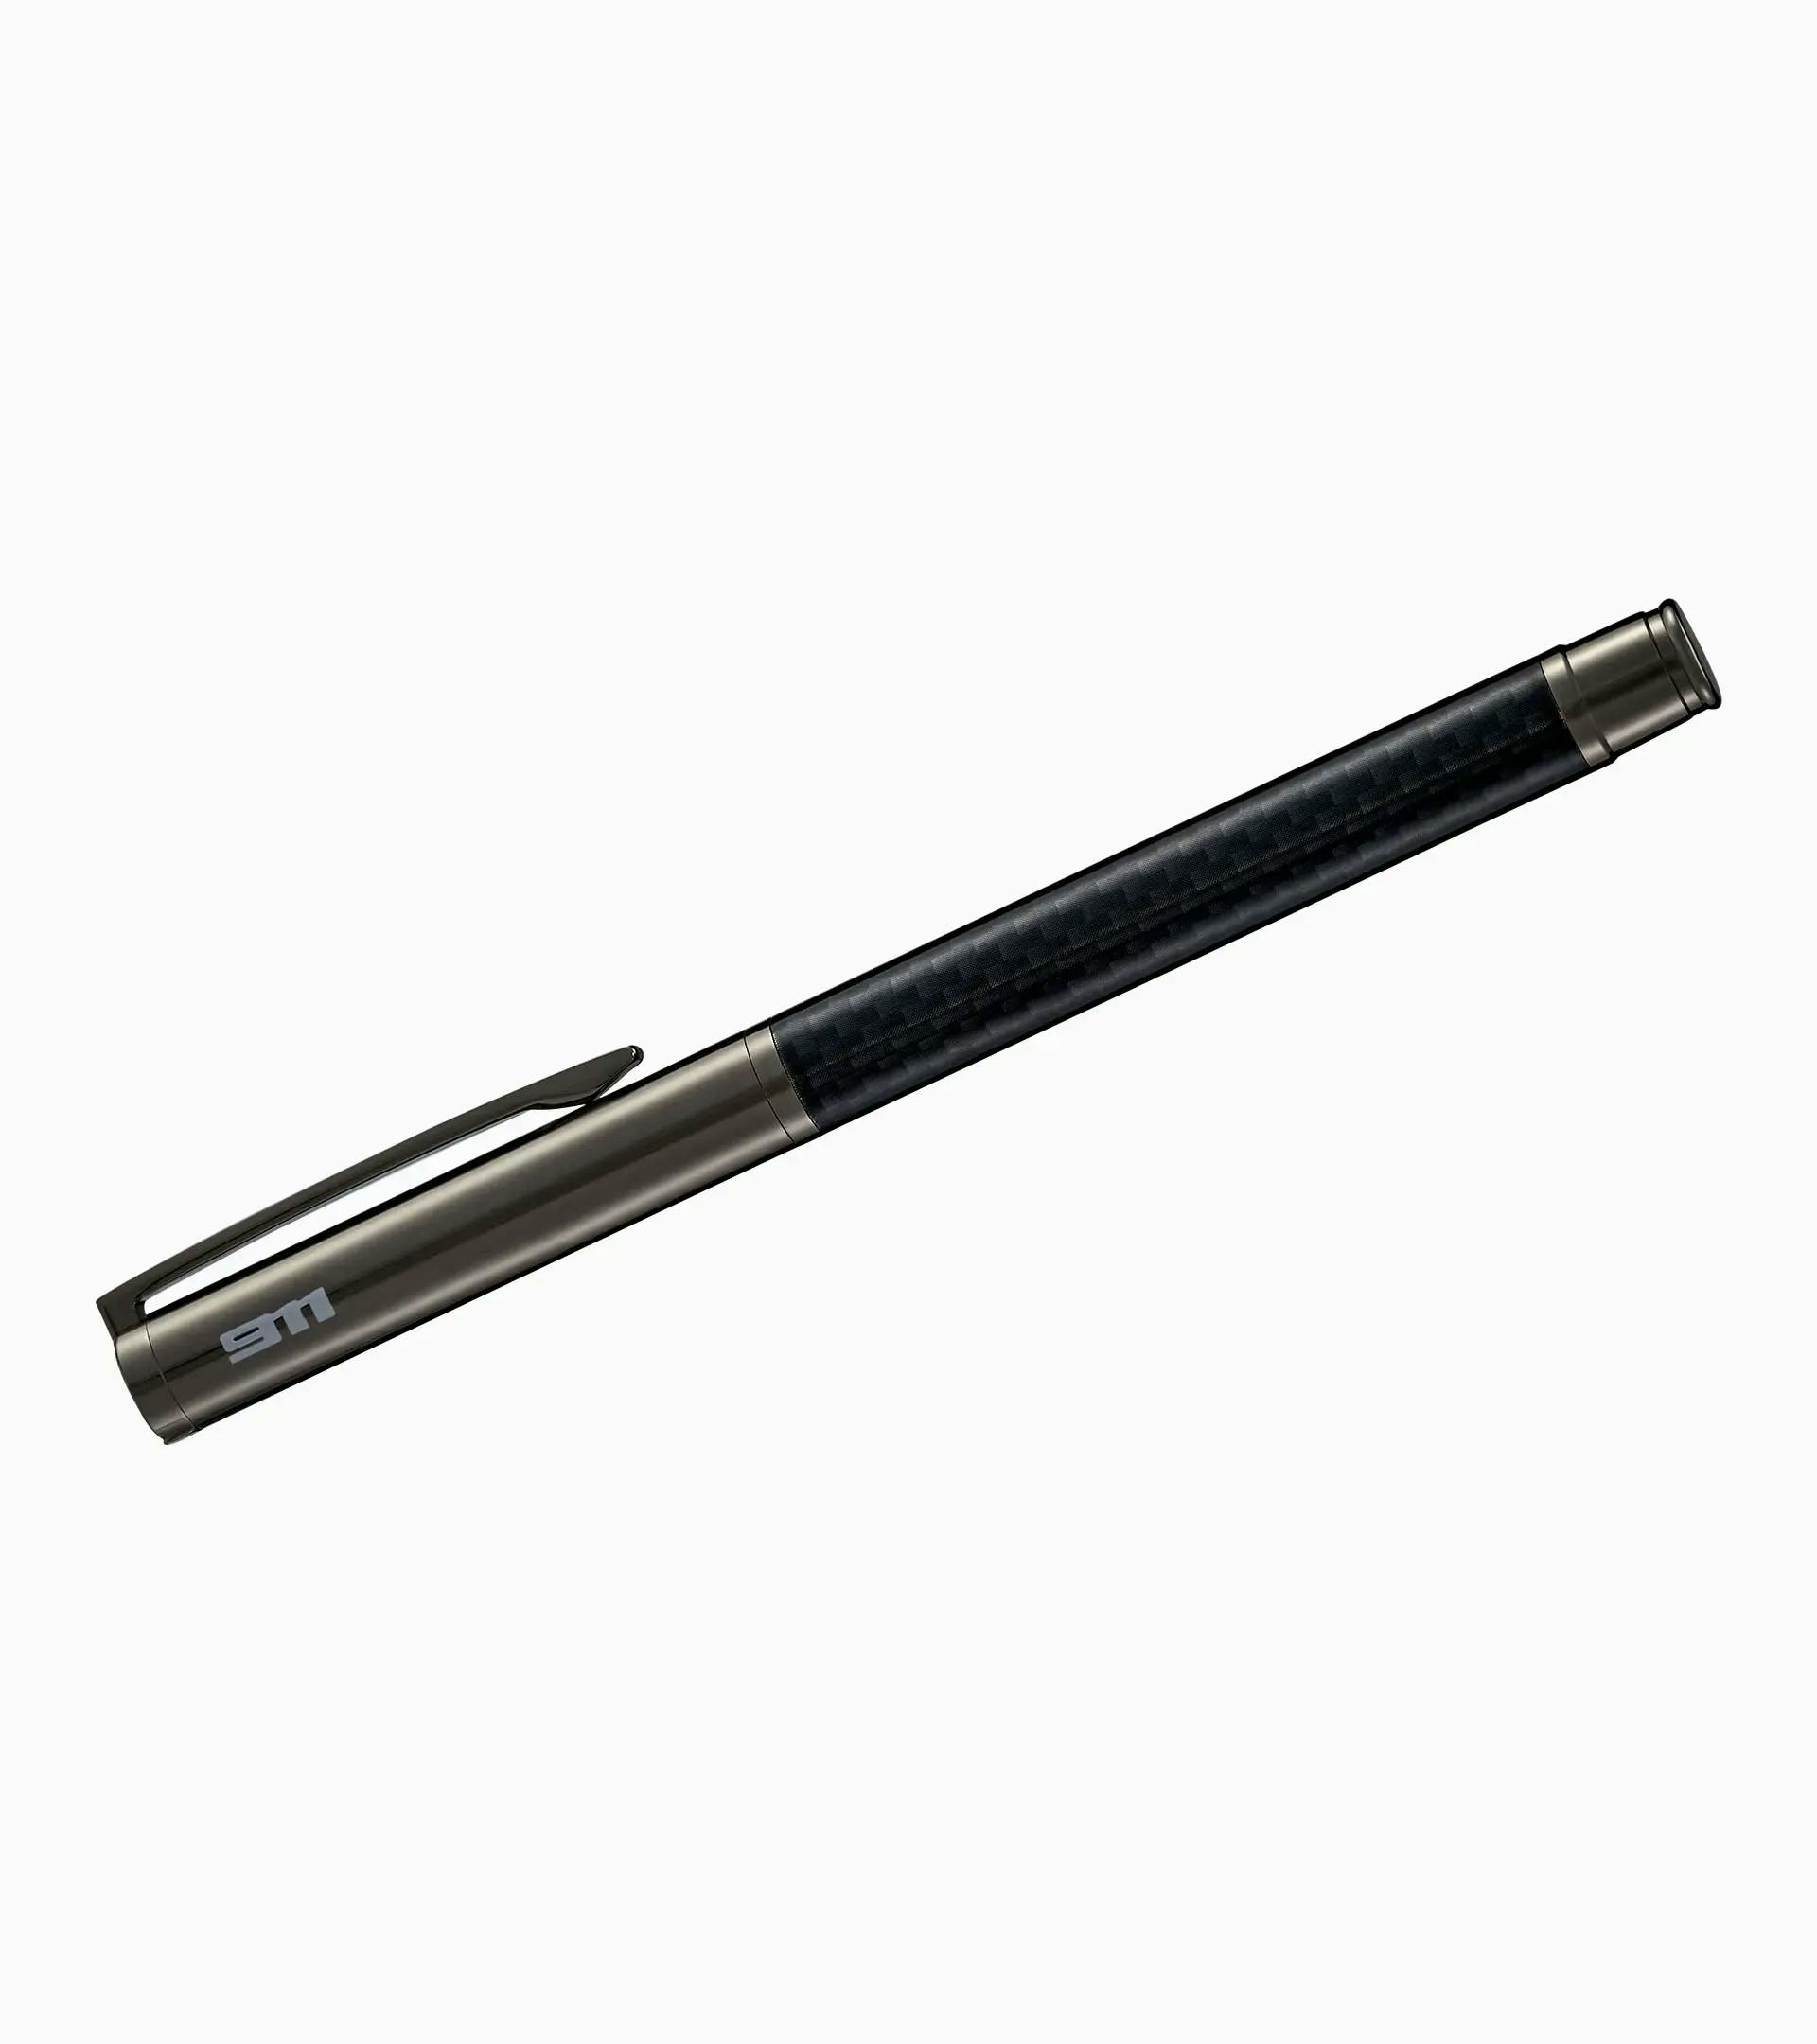 Stylo roller 911 – Essential 3